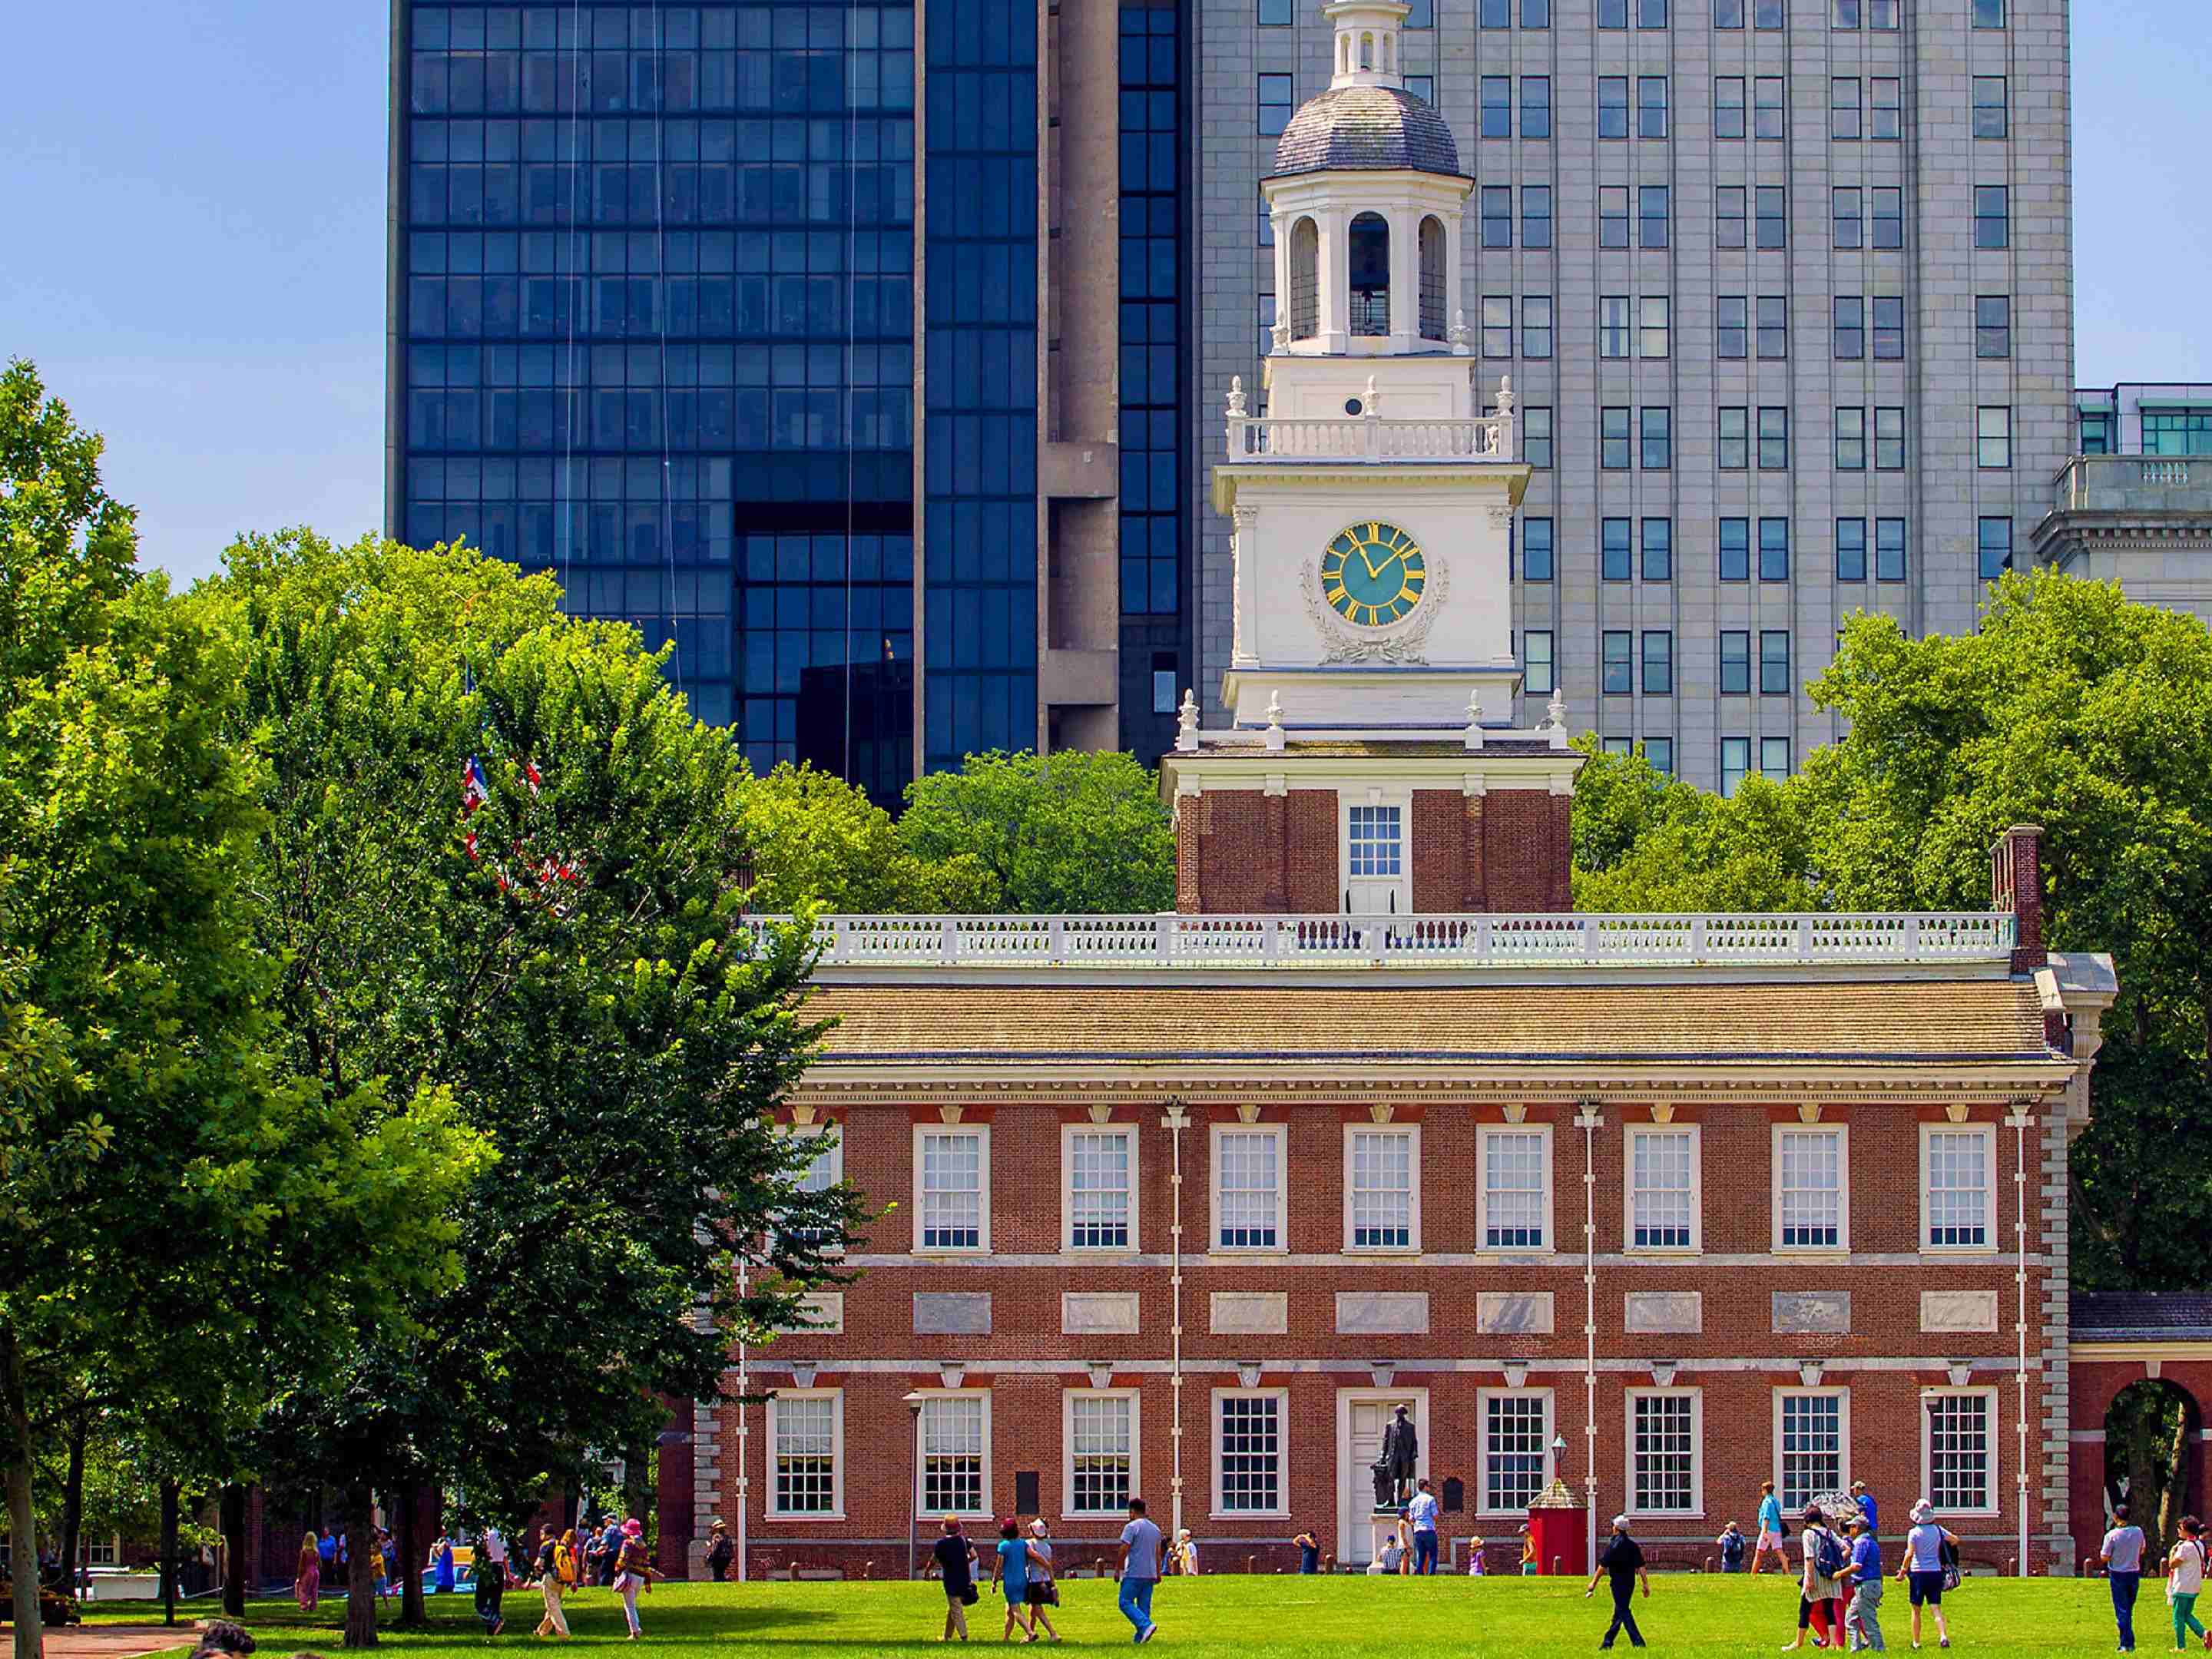 Independence Hall within walking distance